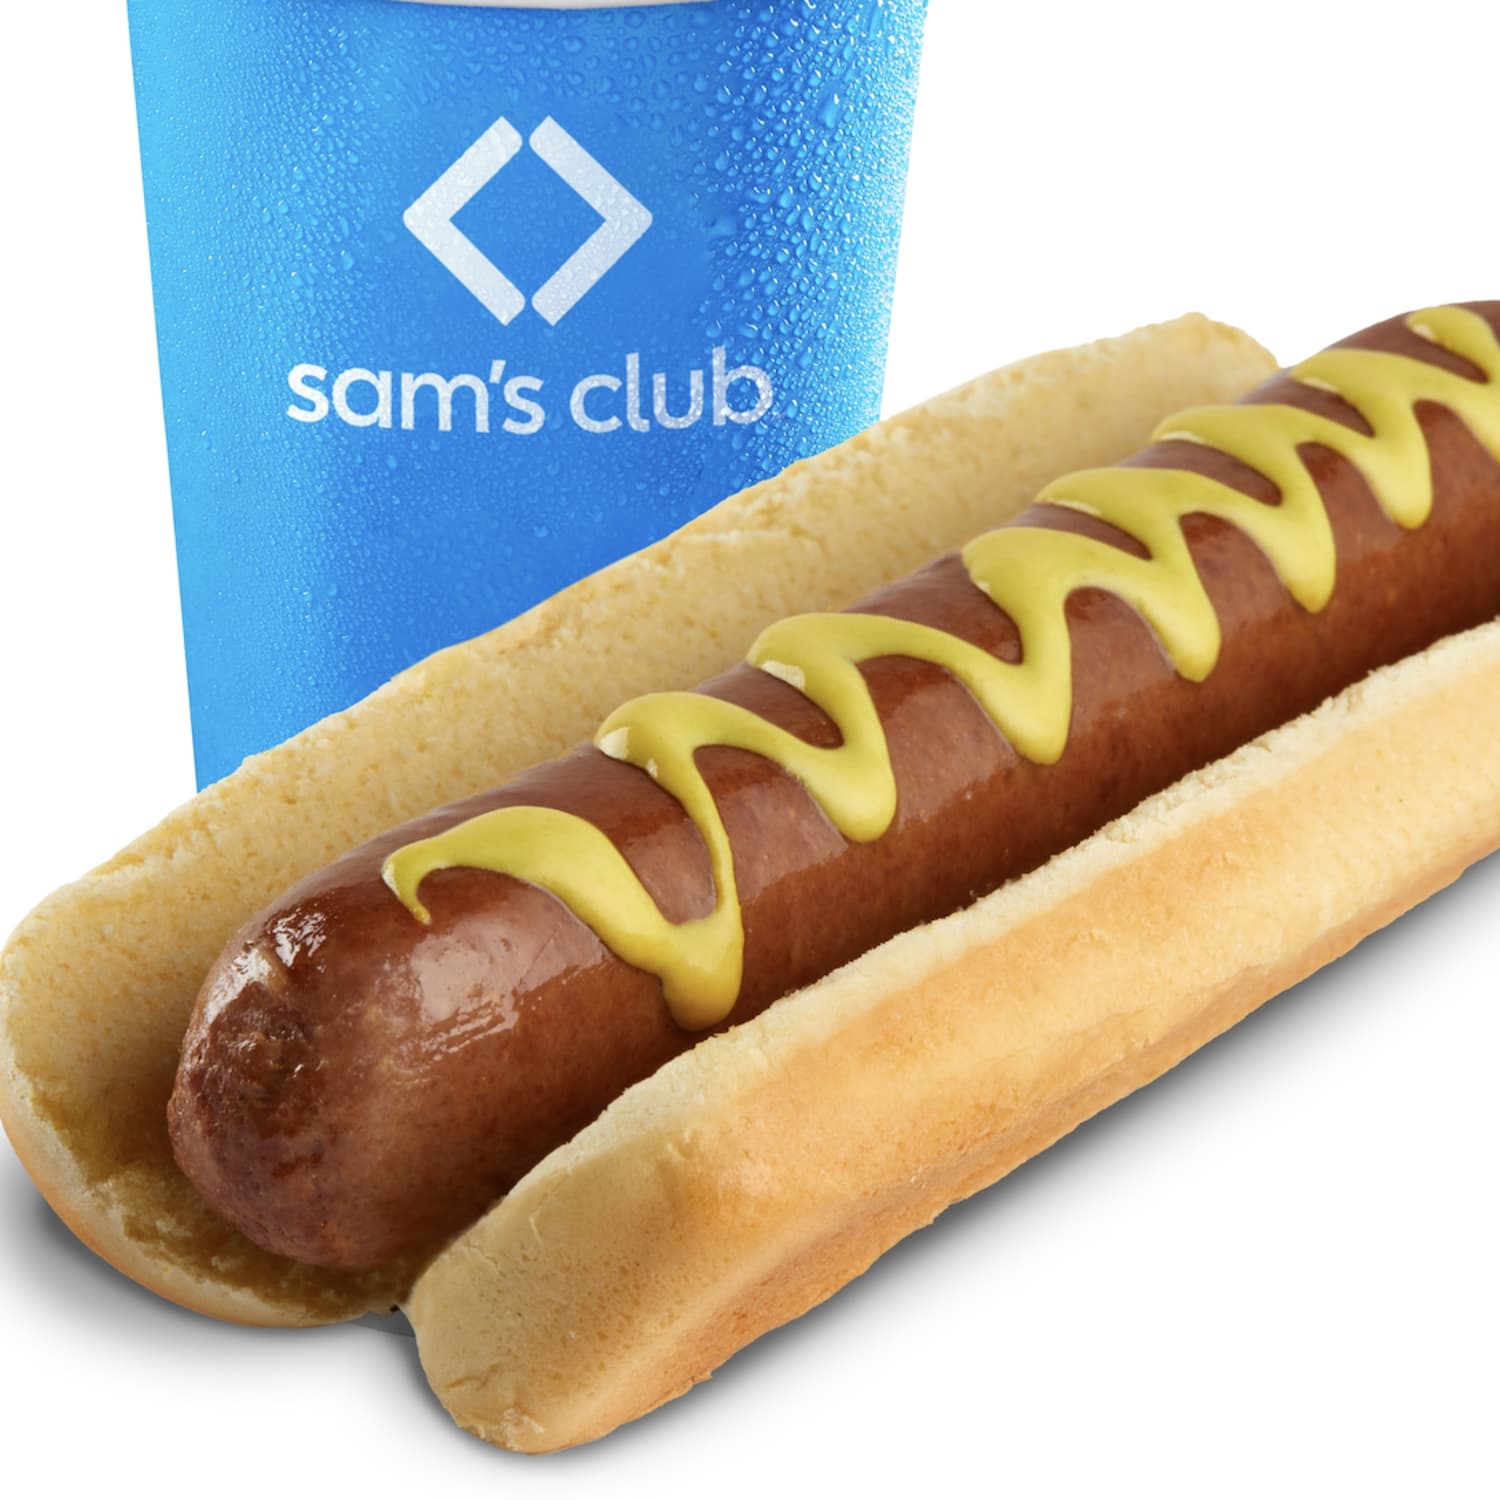 Sam's Club Just Dropped the Price on Its Hot Dog Combo to Just $1.38